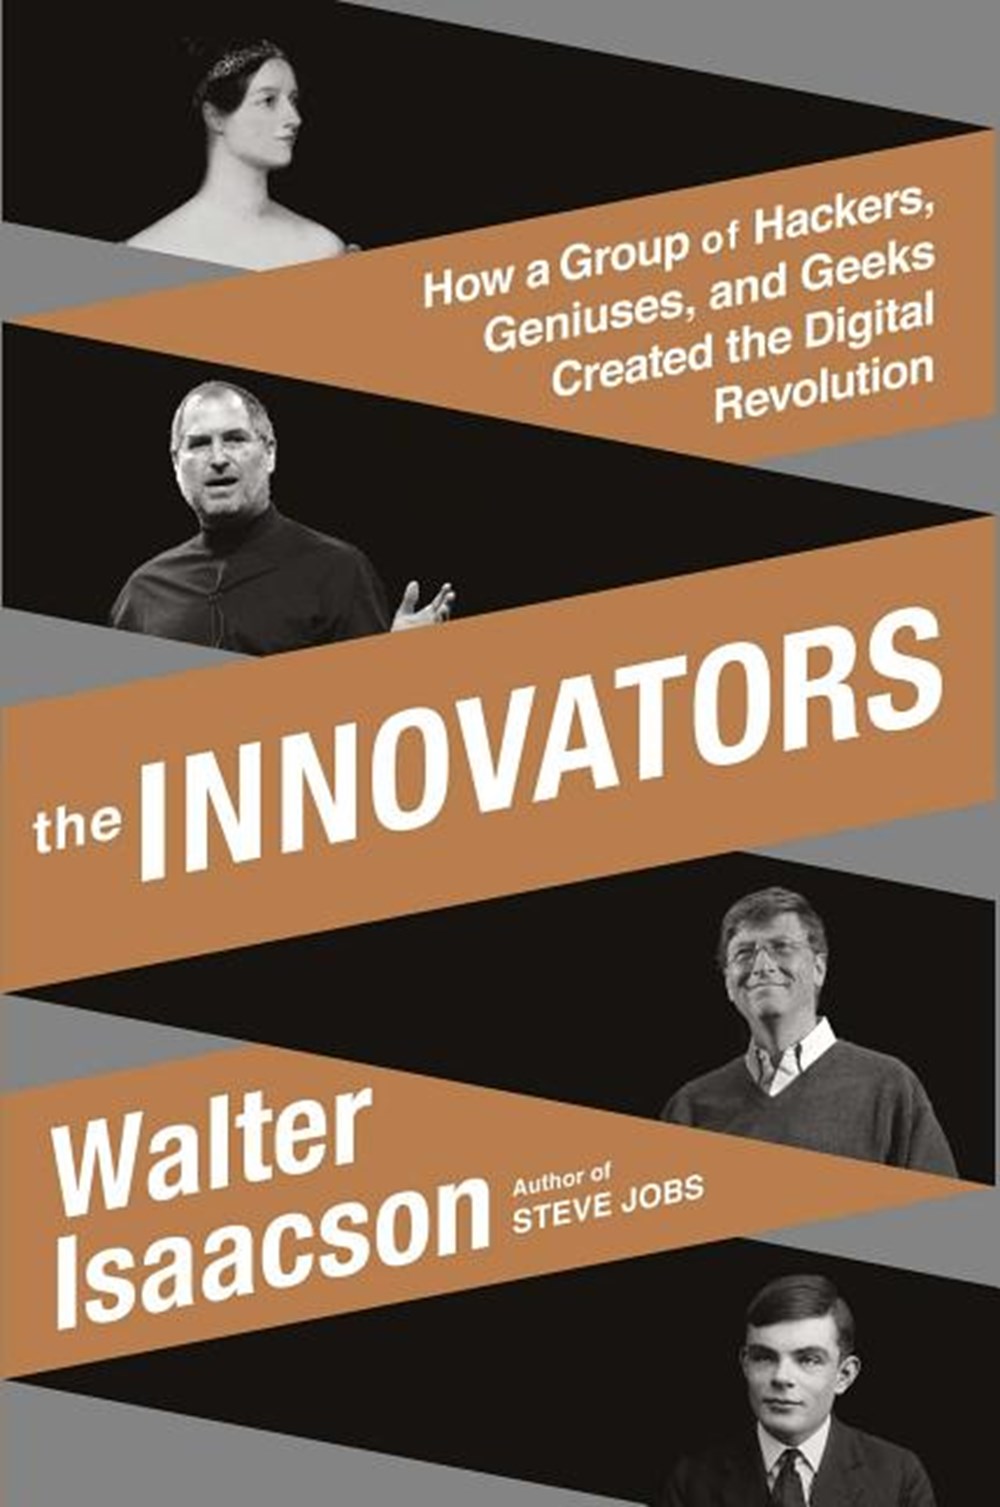 Innovators: How a Group of Hackers, Geniuses, and Geeks Created the Digital Revolution